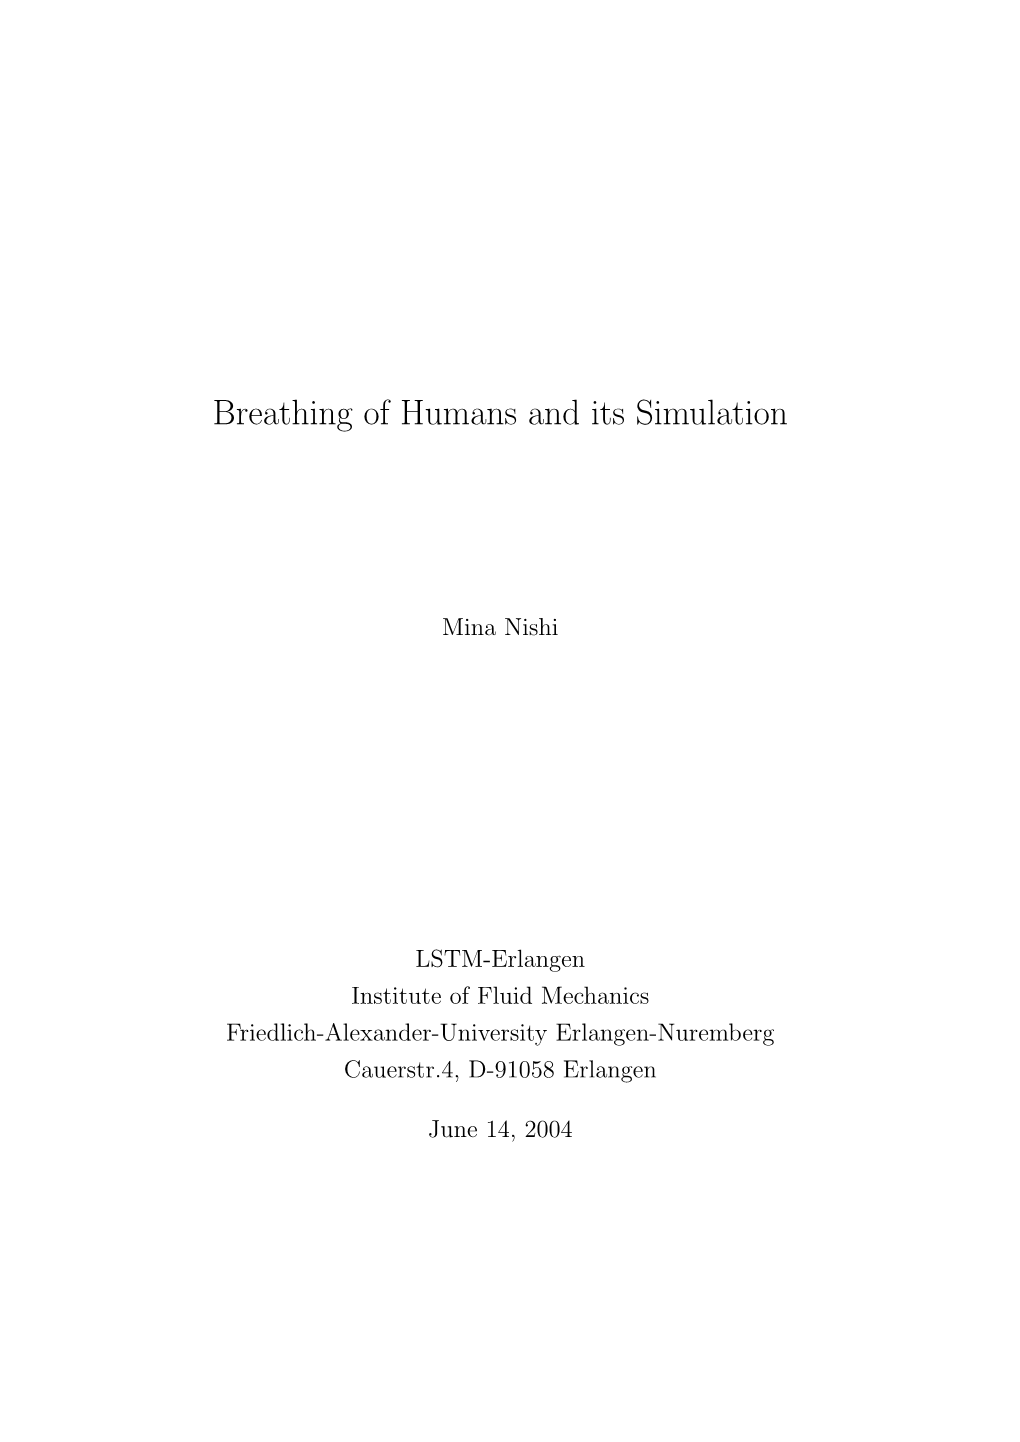 Breathing of Humans and Its Simulation